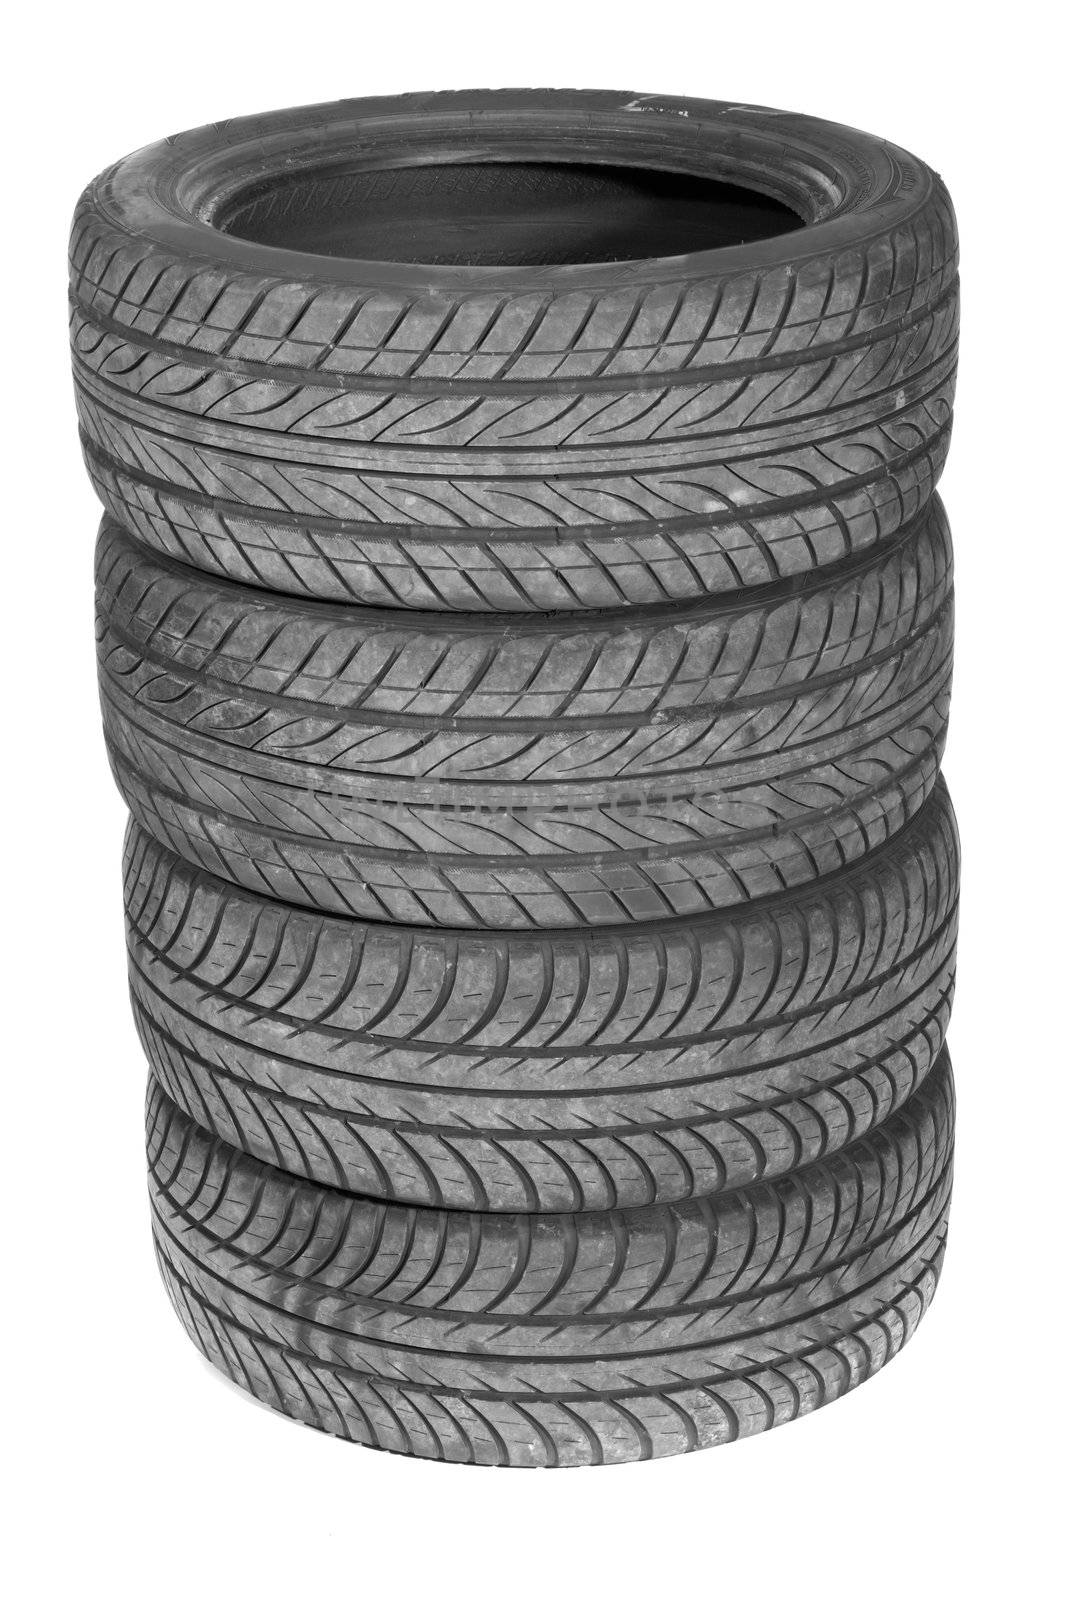 pile of tyres, photo on the white background